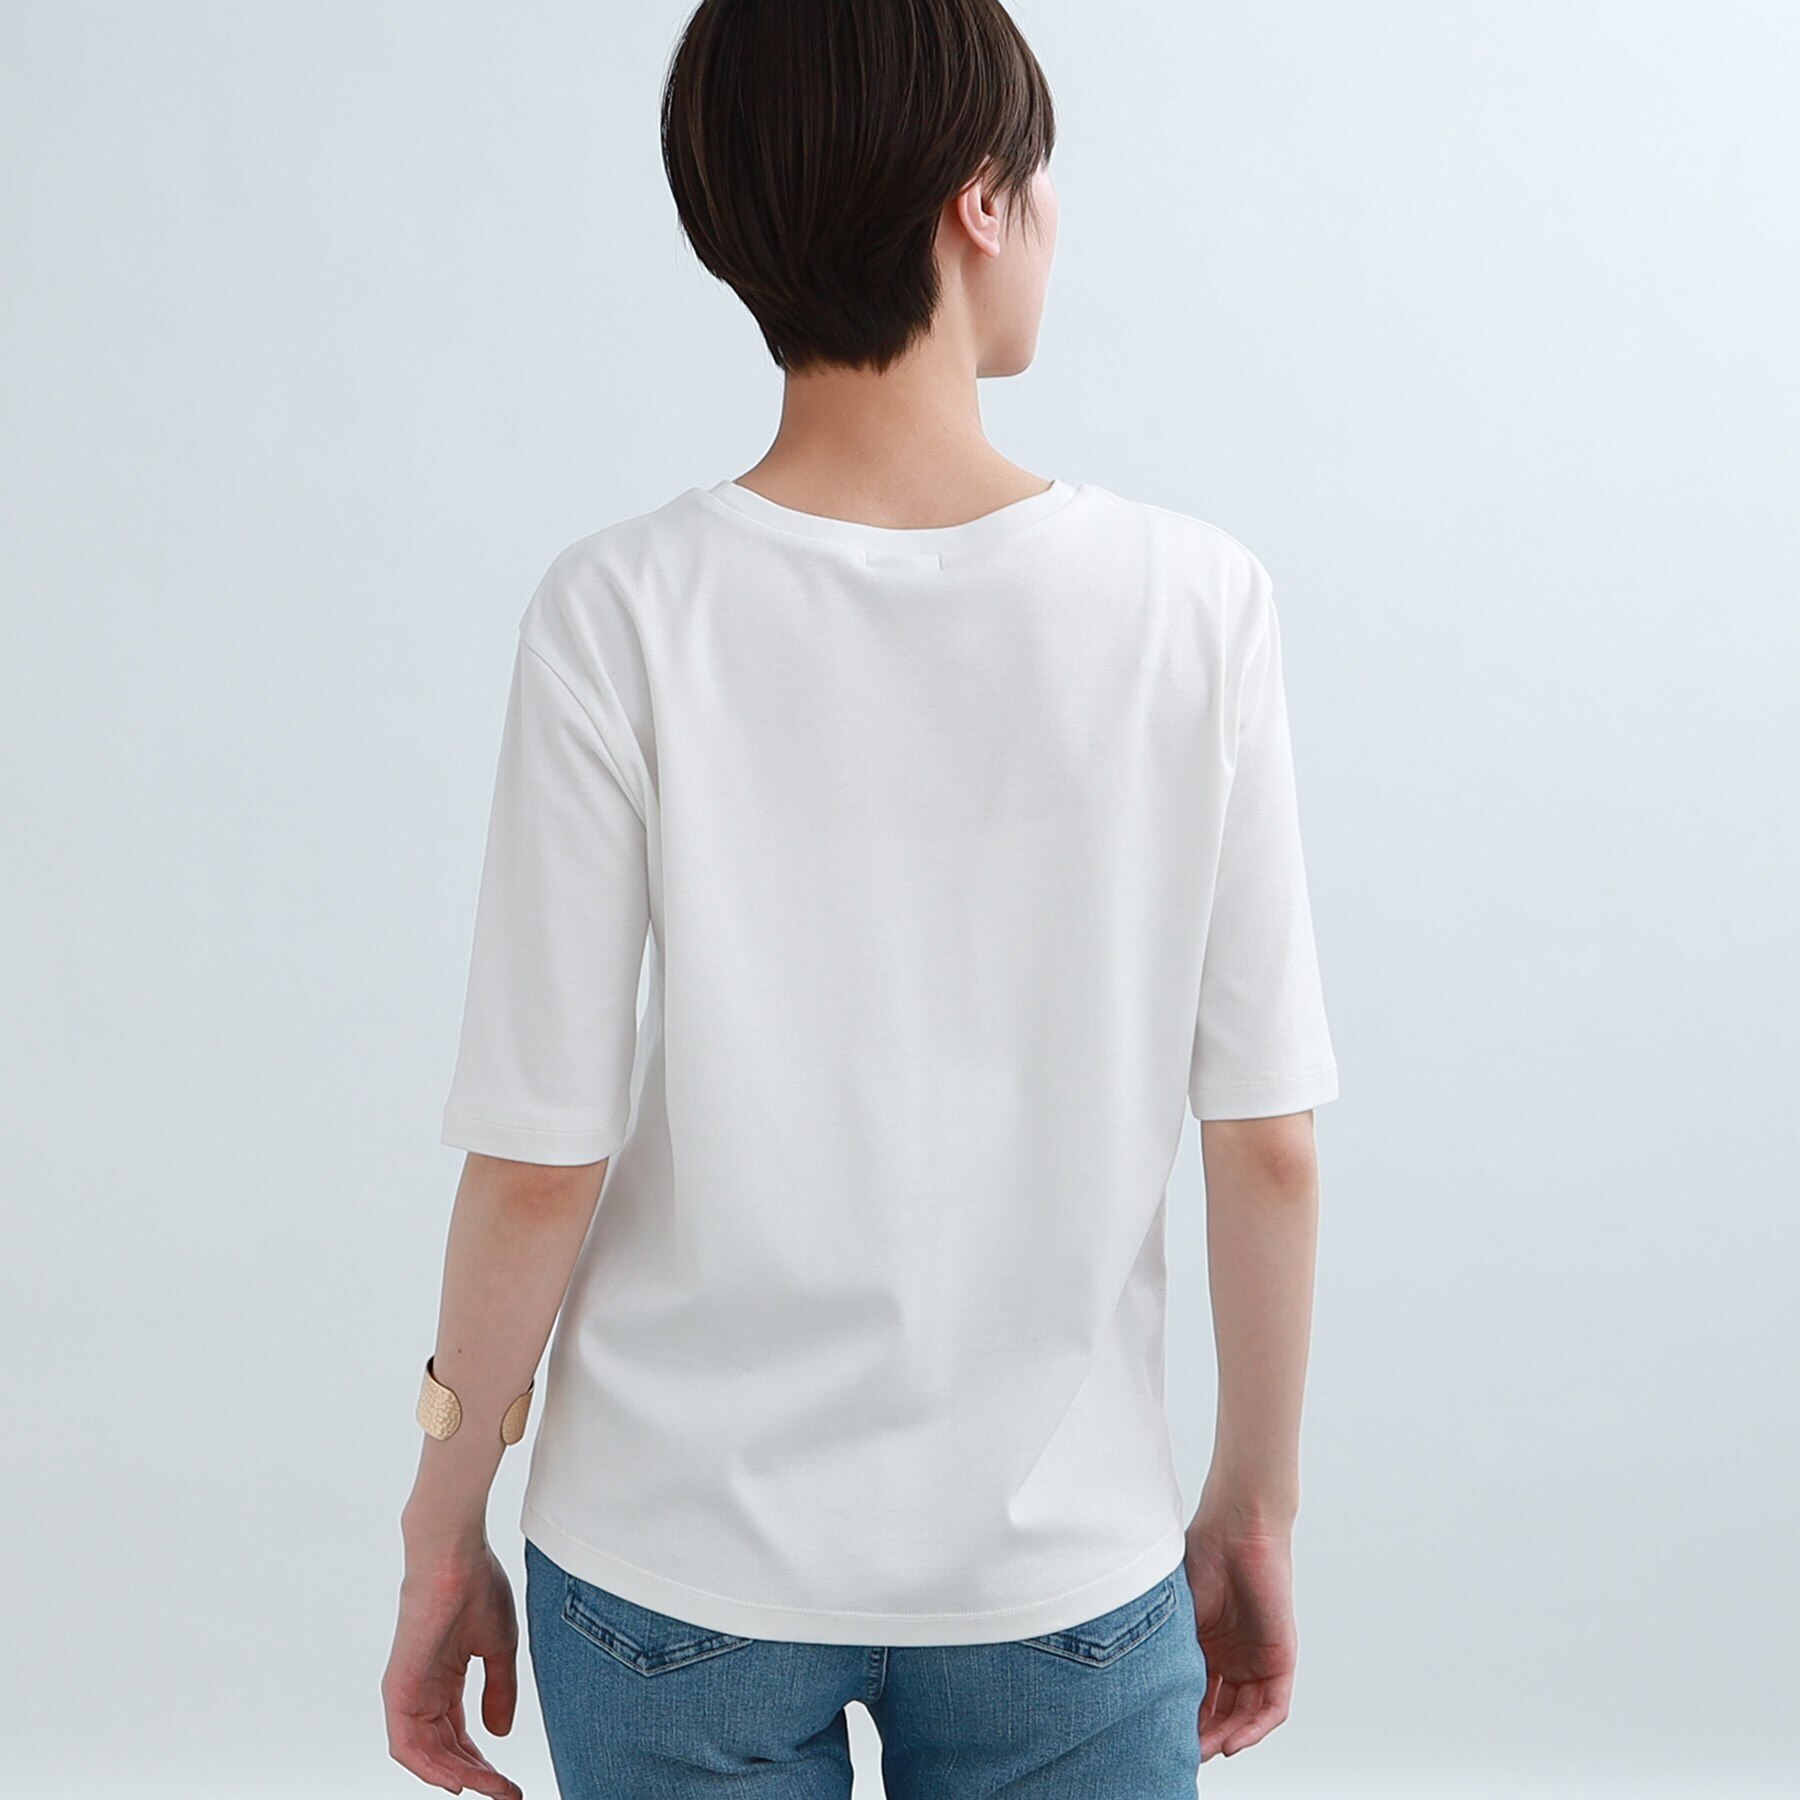 indepict lace tシャツ2枚セット